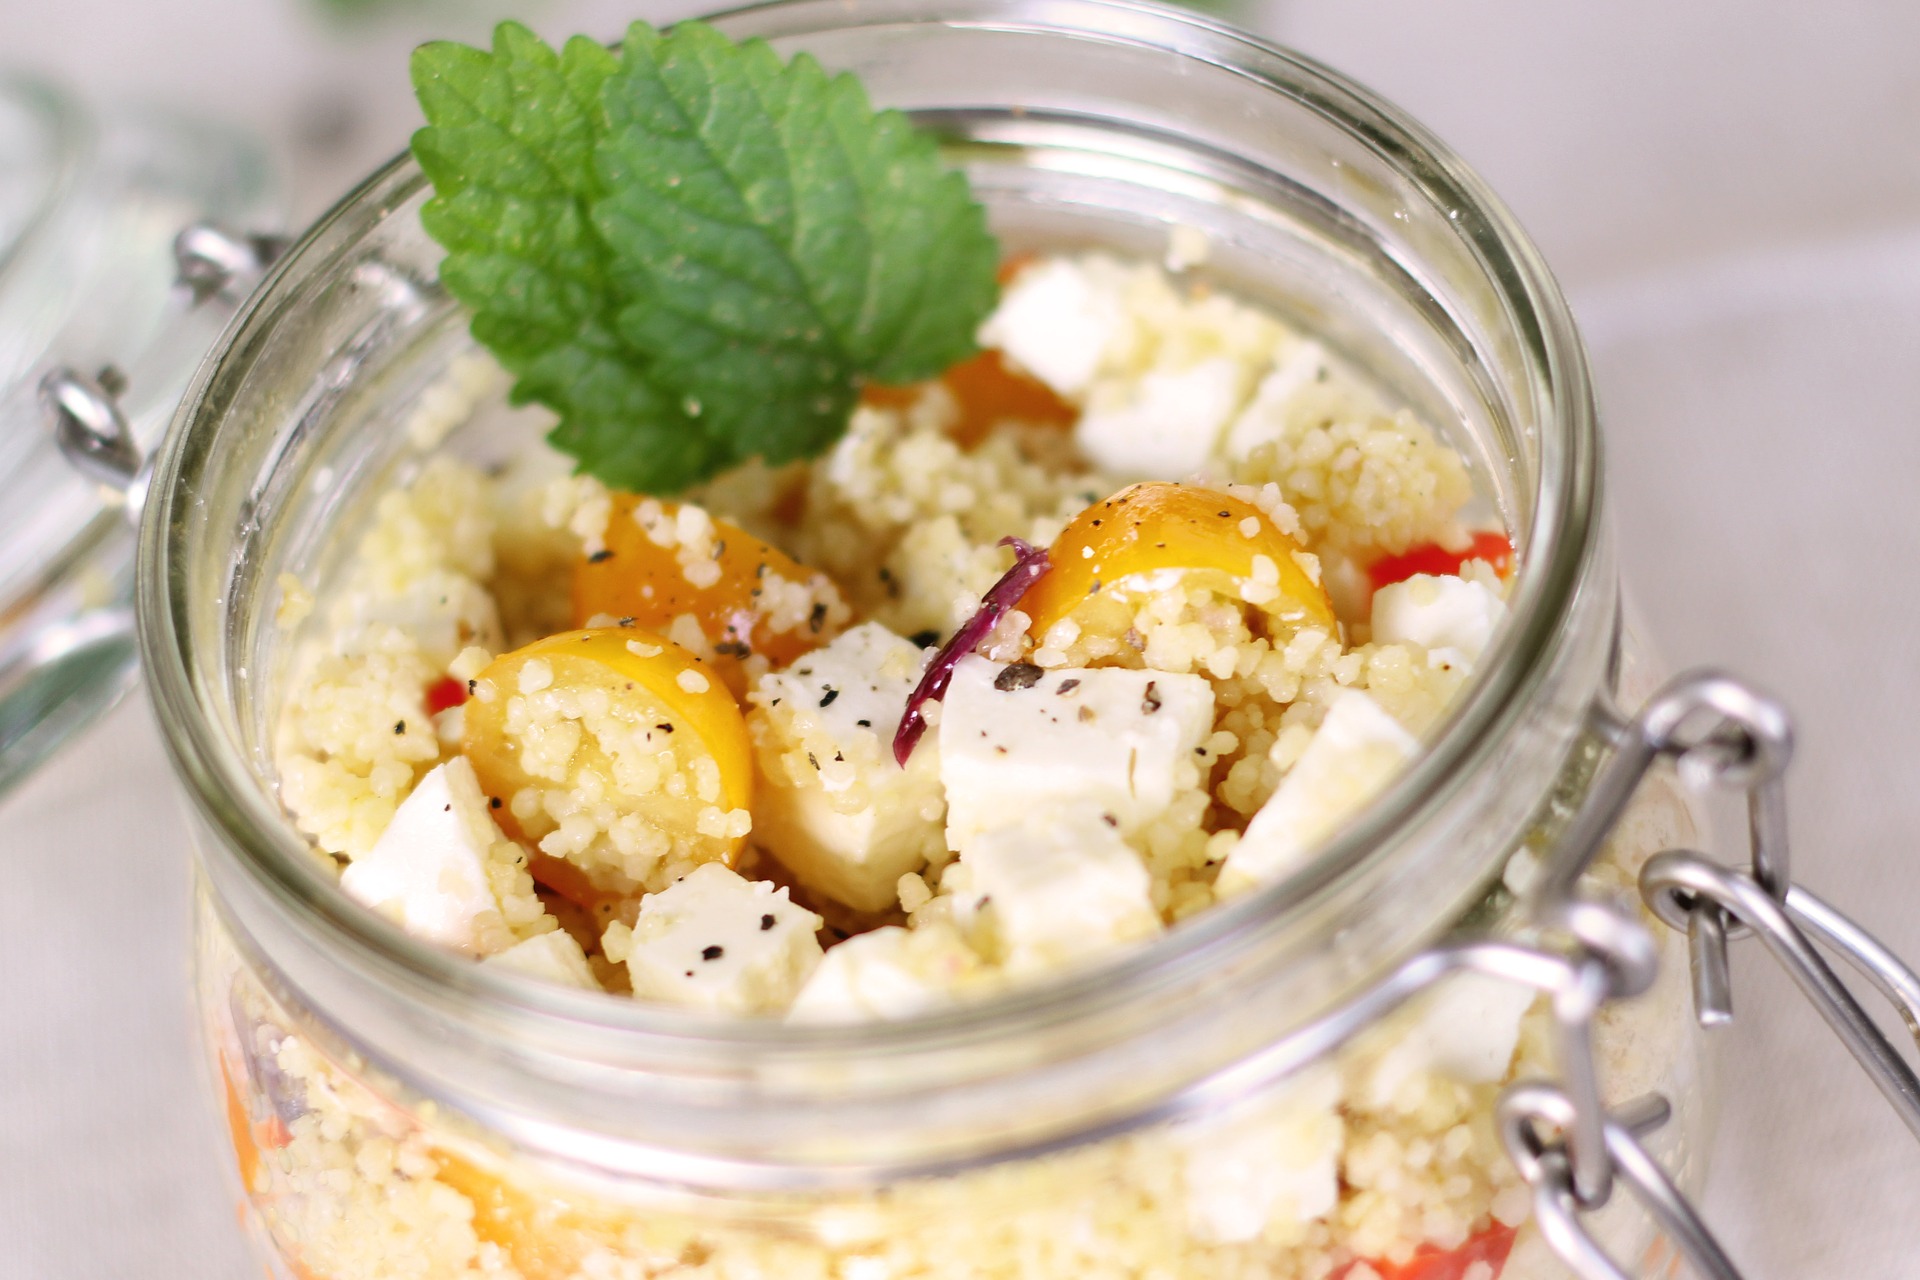 Mini jars of cous cous with vegetables and feta